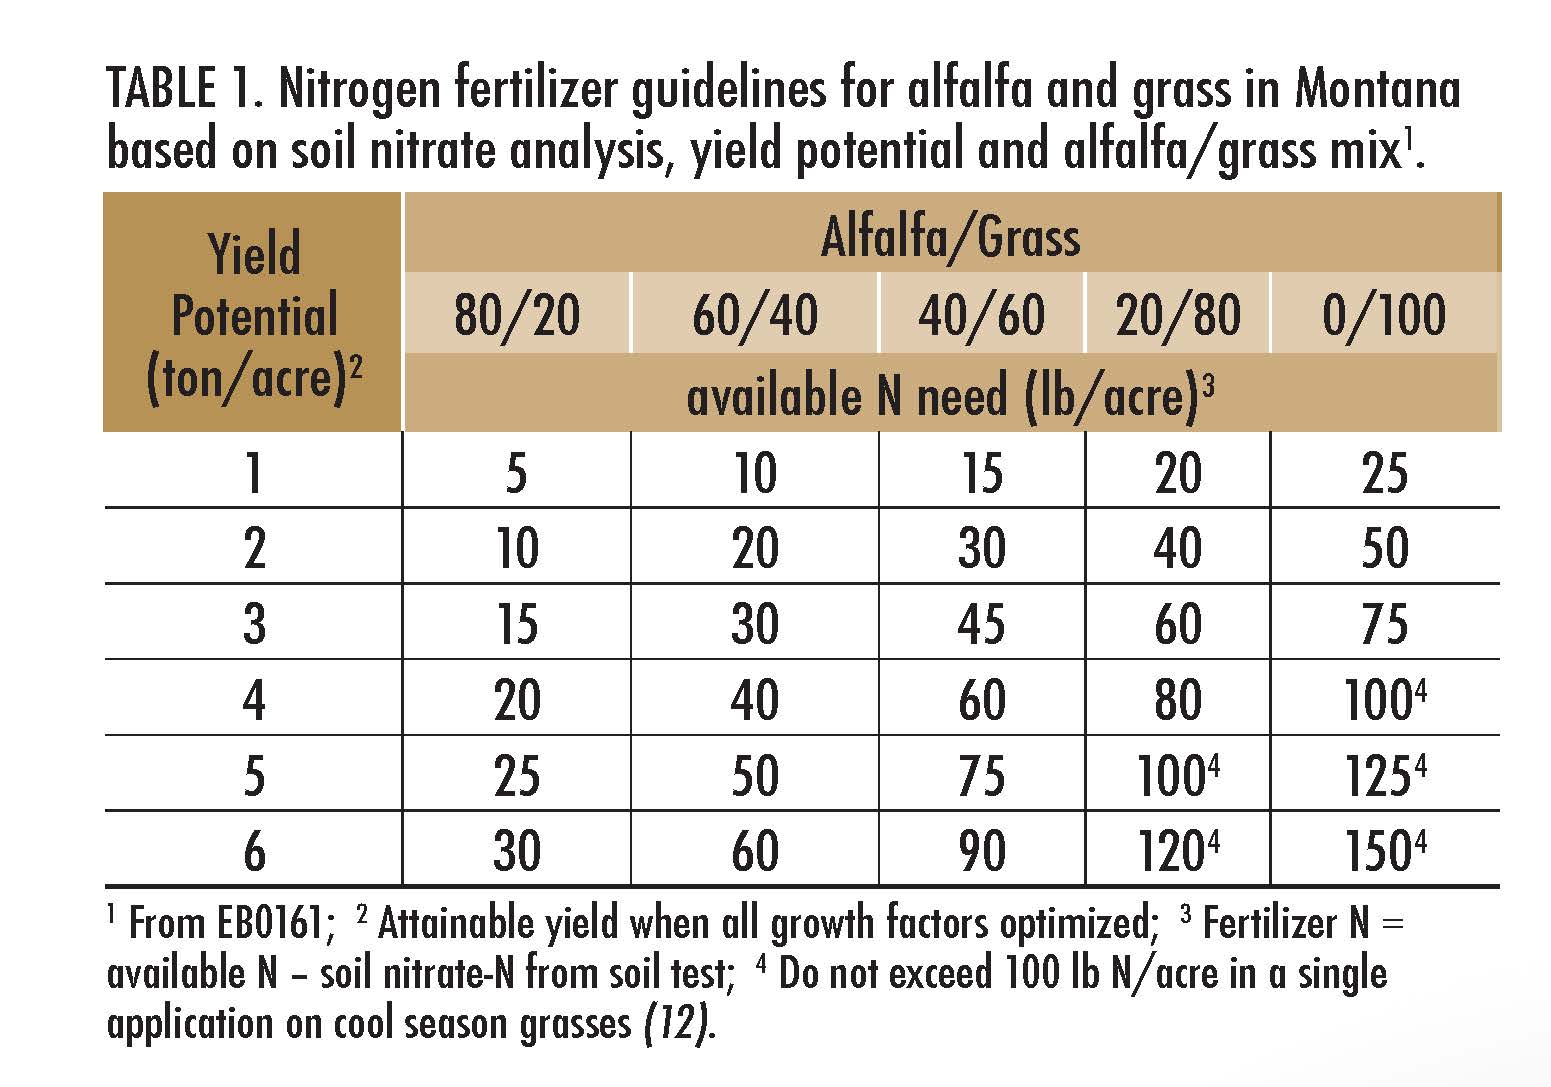 Table 1. Nitrogen fertilizer guidelines for alfalfa and grass in Montana based on soil nitrate analysis, yeild potential and alfalfa/grass mix.